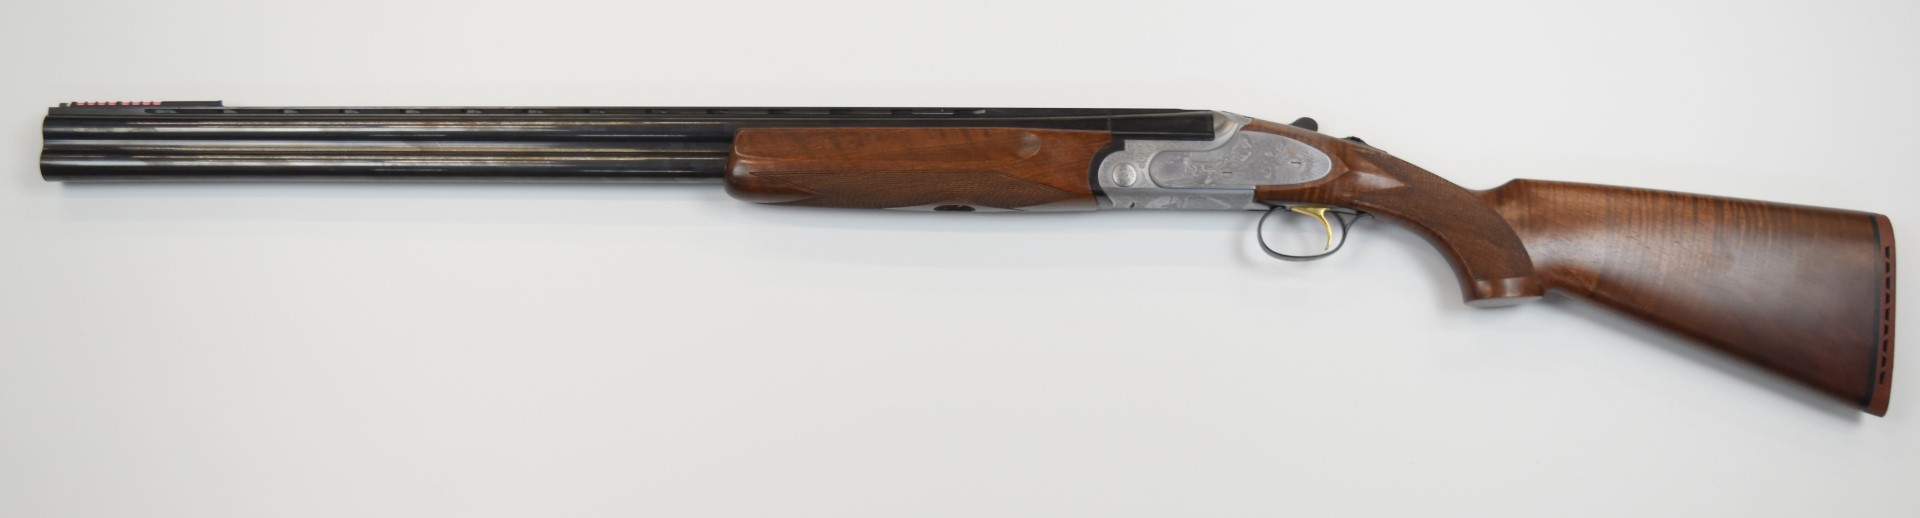 Sabatti 12 bore over under ejector shotgun with engraved scenes of birds to the sidelock plates - Image 7 of 12